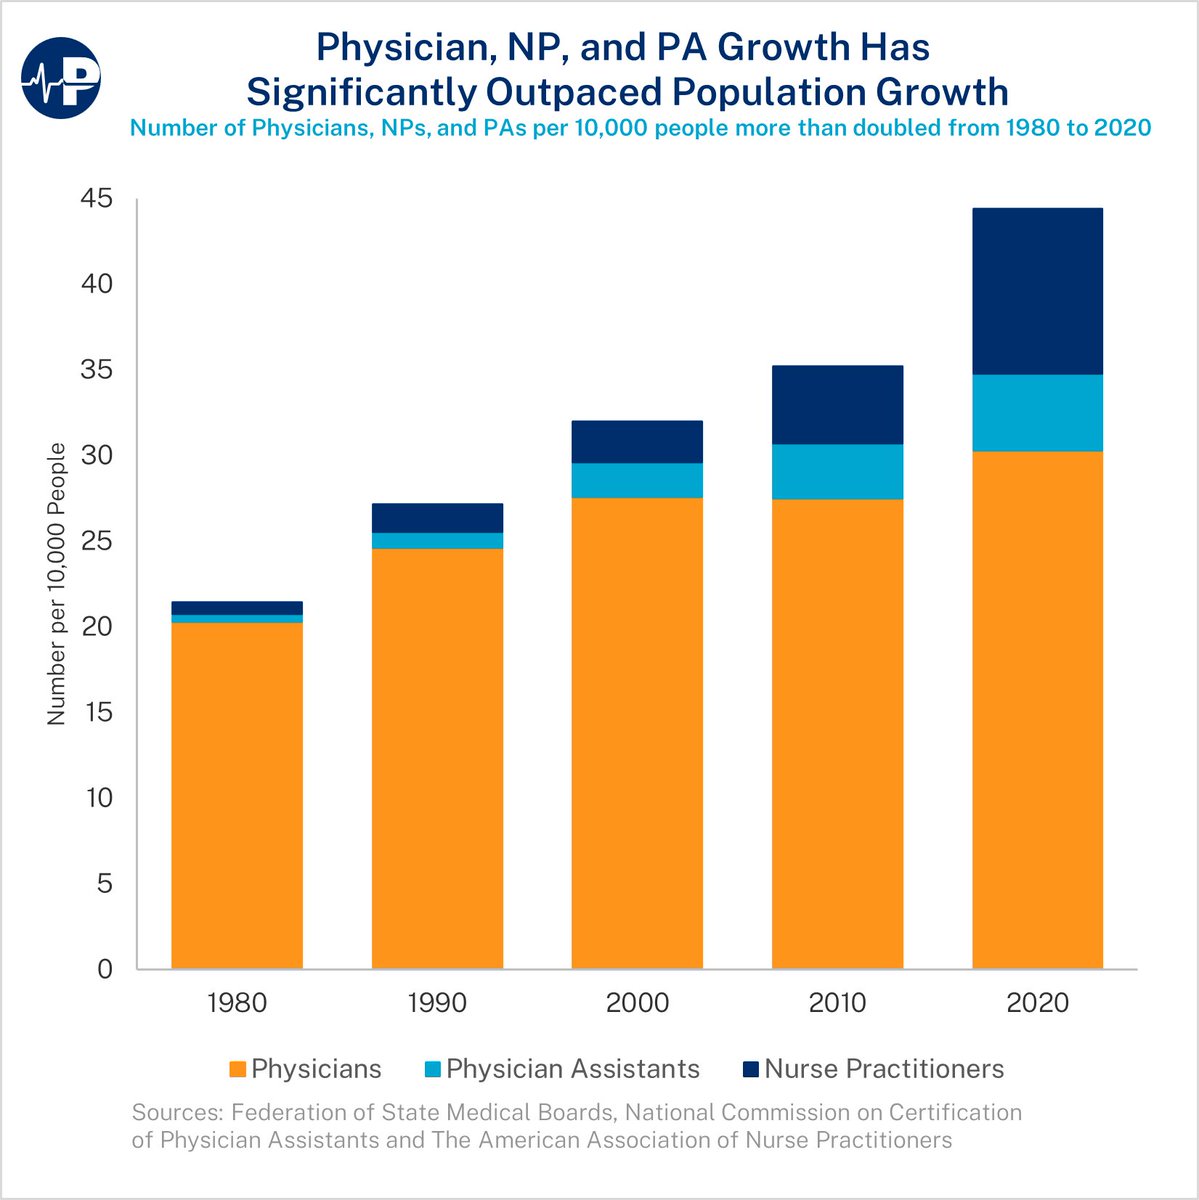 NEW📈: The number of US physicians, NPs, and PAs per capita has more than doubled in the last 40 years.

#NPs and #PAs made up over 56% of workforce growth. These roles were almost non-existent in 1980 but are crucial today. #ParagonPIC